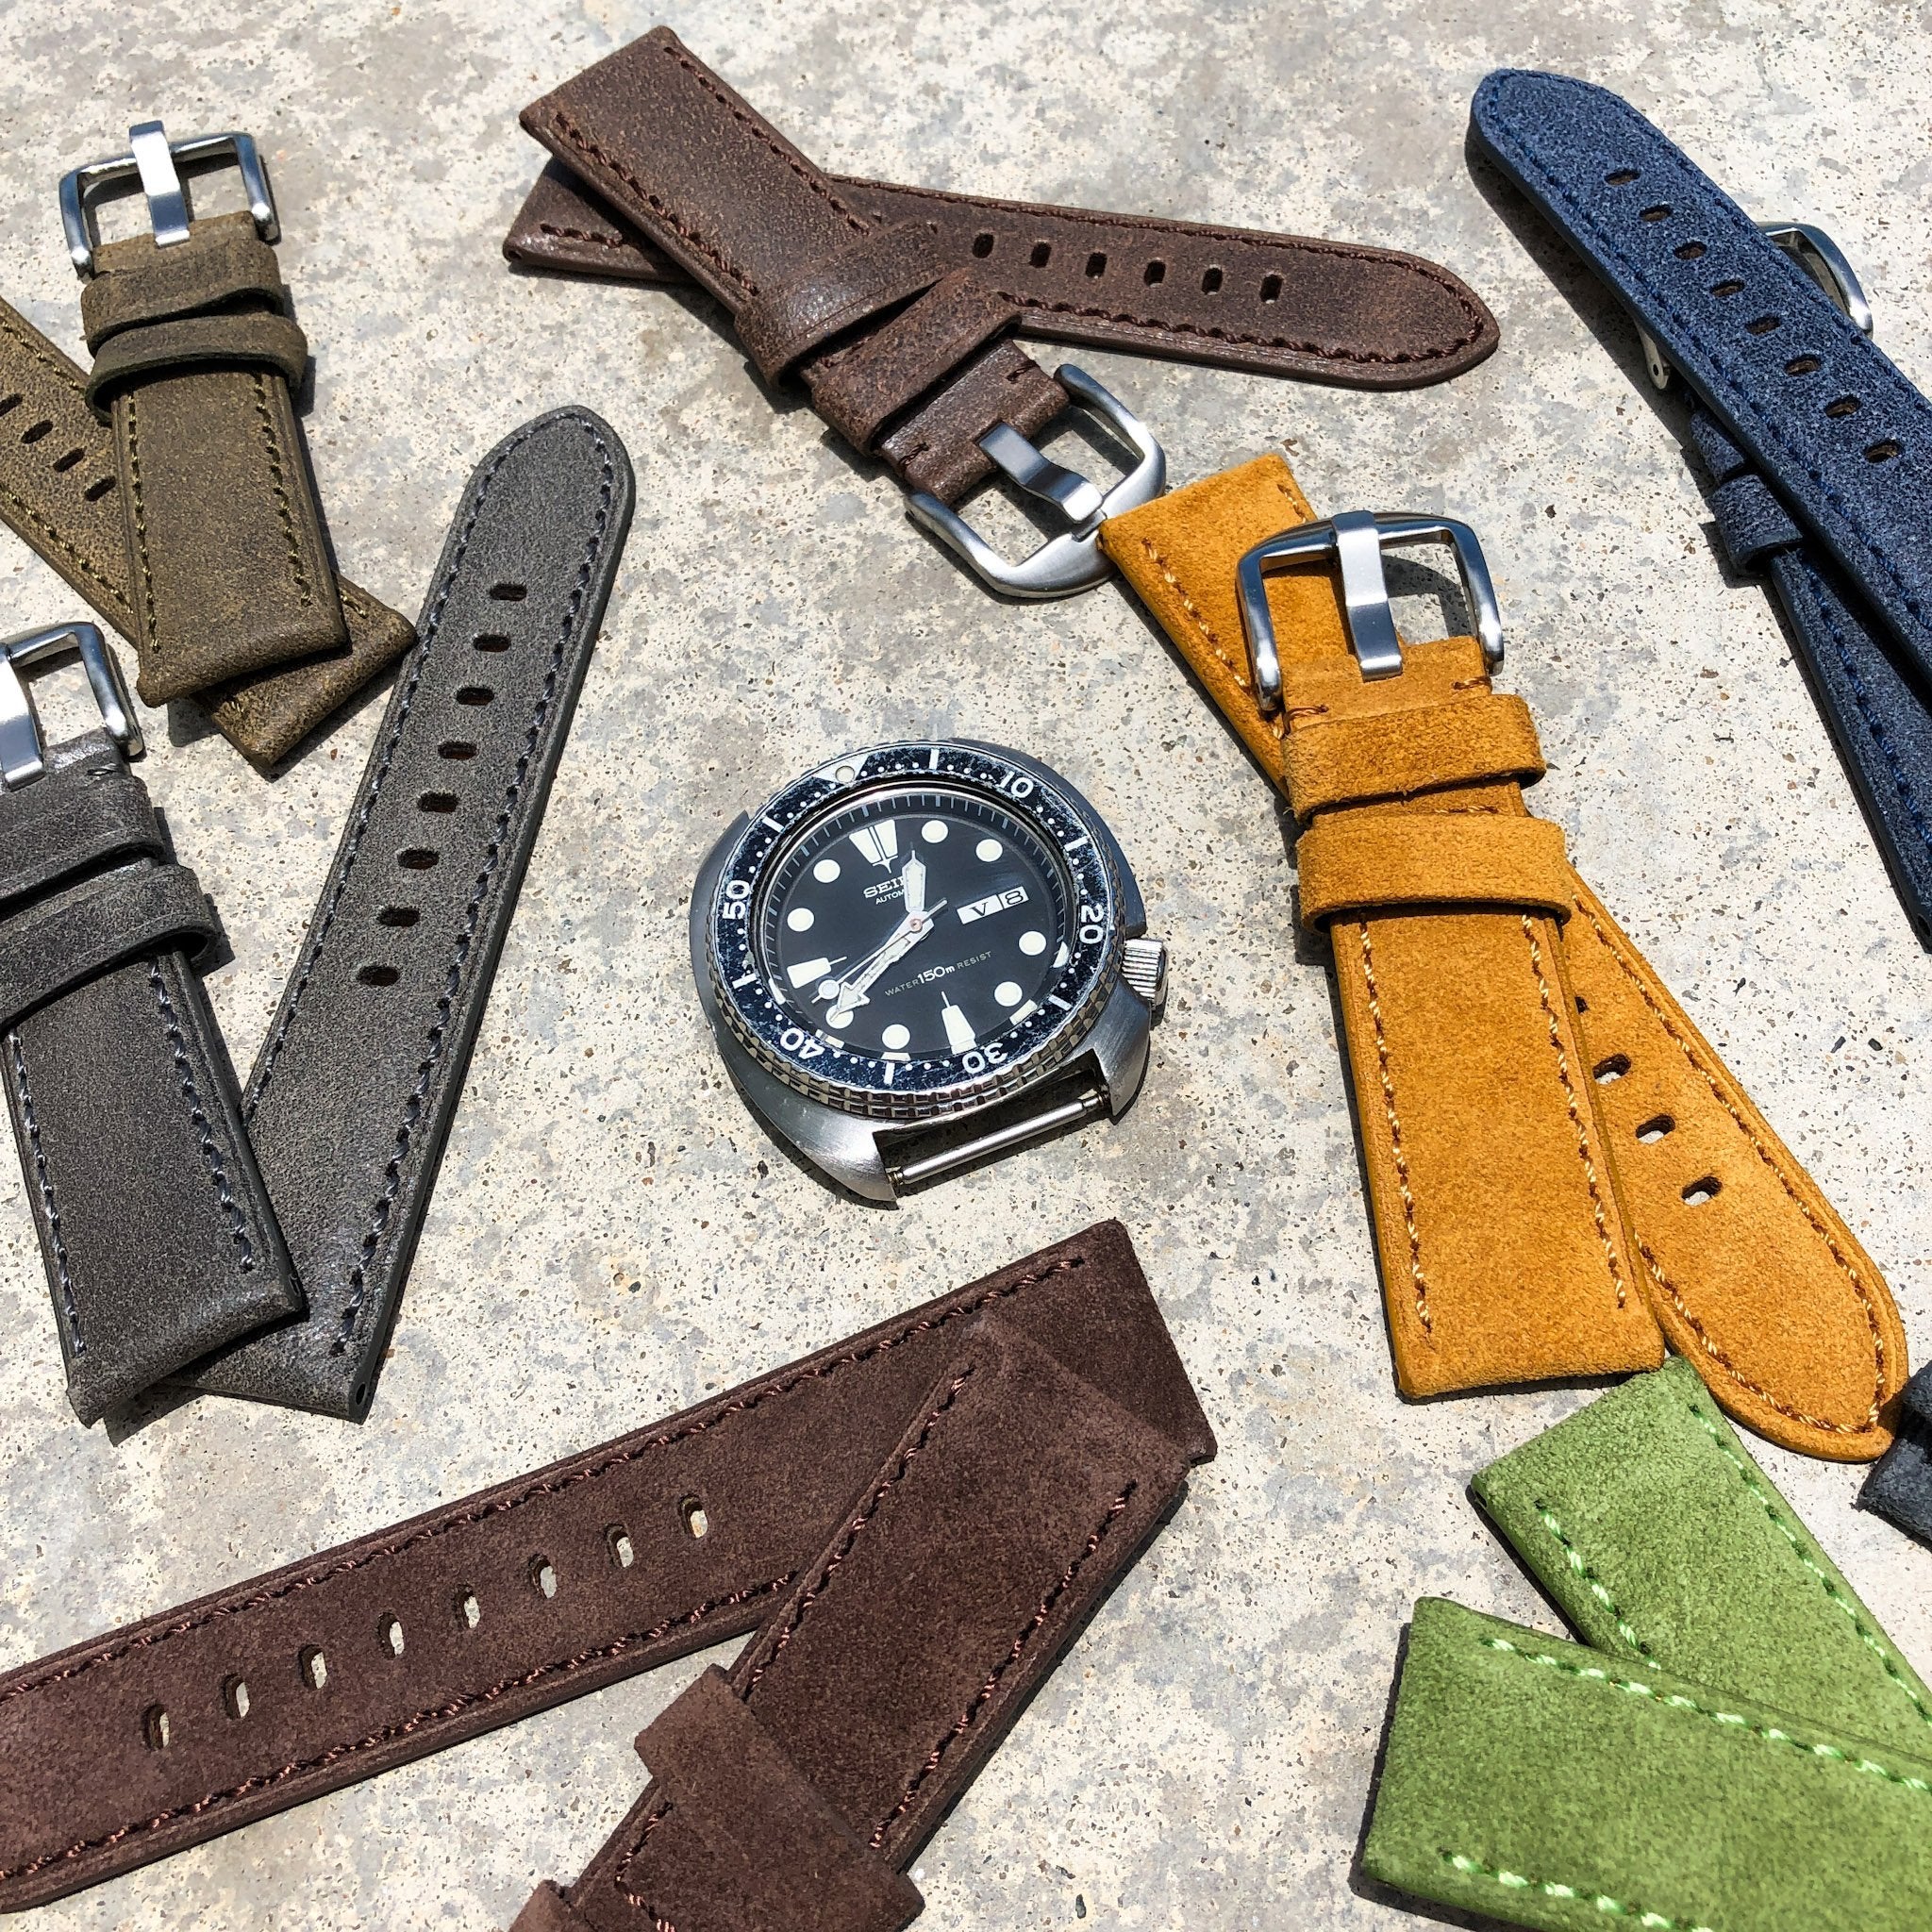 Slime Green Suede w/ White Stitches | Calfskin Italian Leather Watch Strap